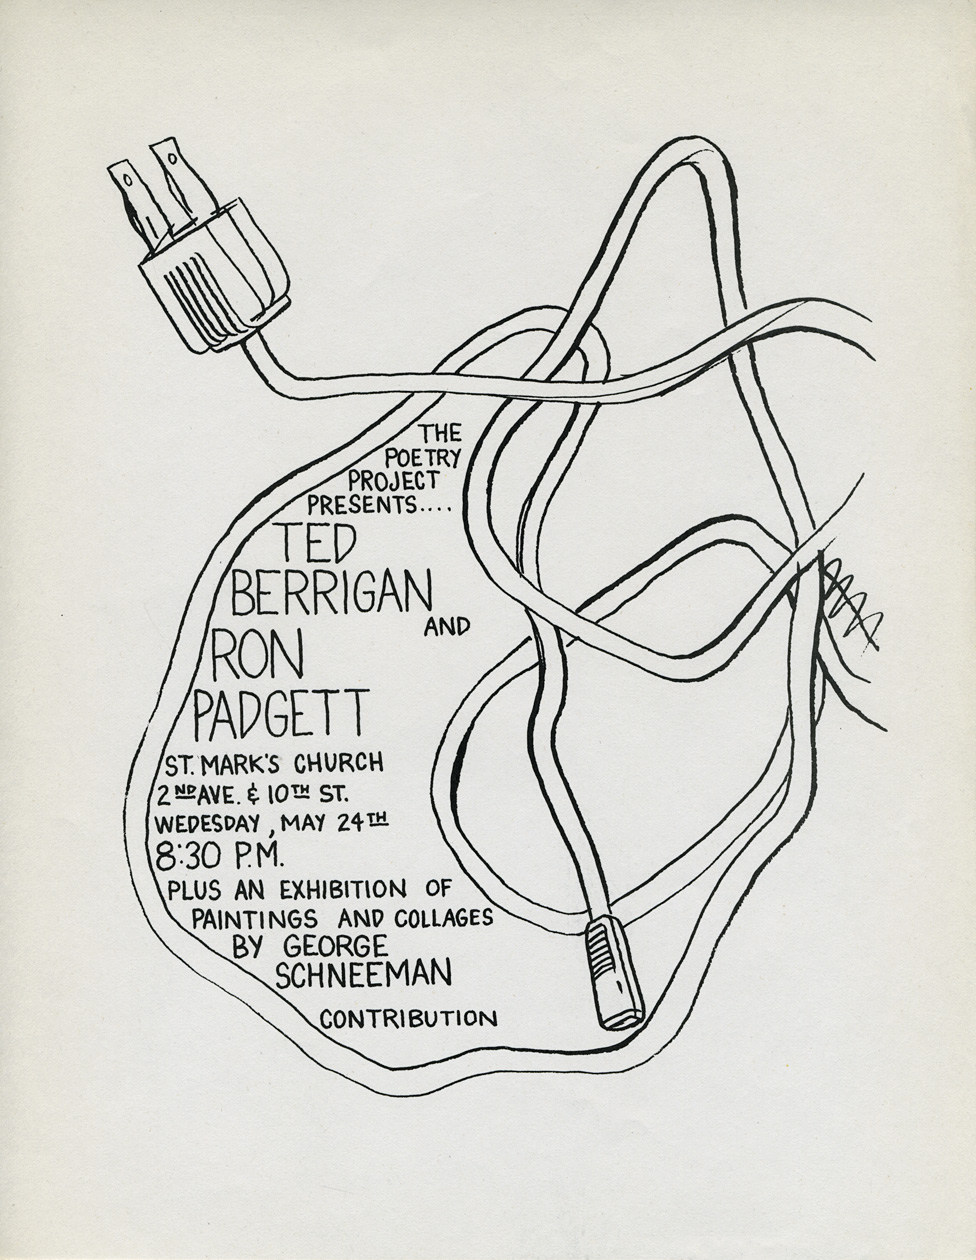 Flyer for a reading by Ted Berrigan and Ron Padgett plus an exhibition of paintings and collages by George Schneeman at The Poetry Project at St. Mark’s Church, May 24 [no year]. Artwork by George Schneeman? 8 1/2 x 11 inches.